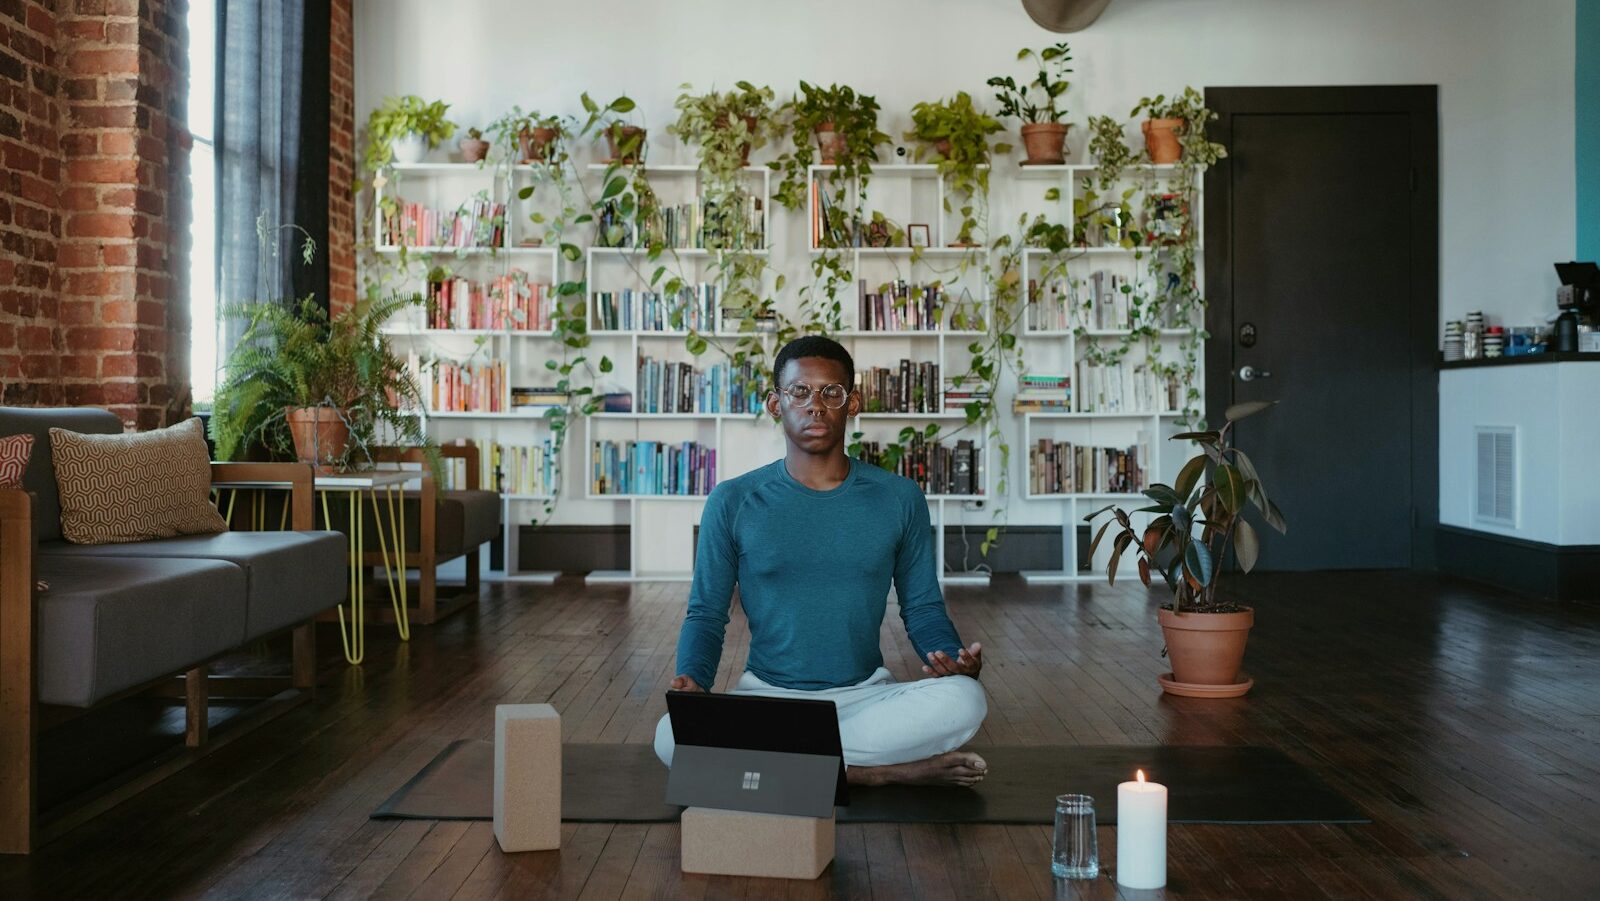 Image Description: self-care, a man sitting on a yoga mat with a laptop in front of him